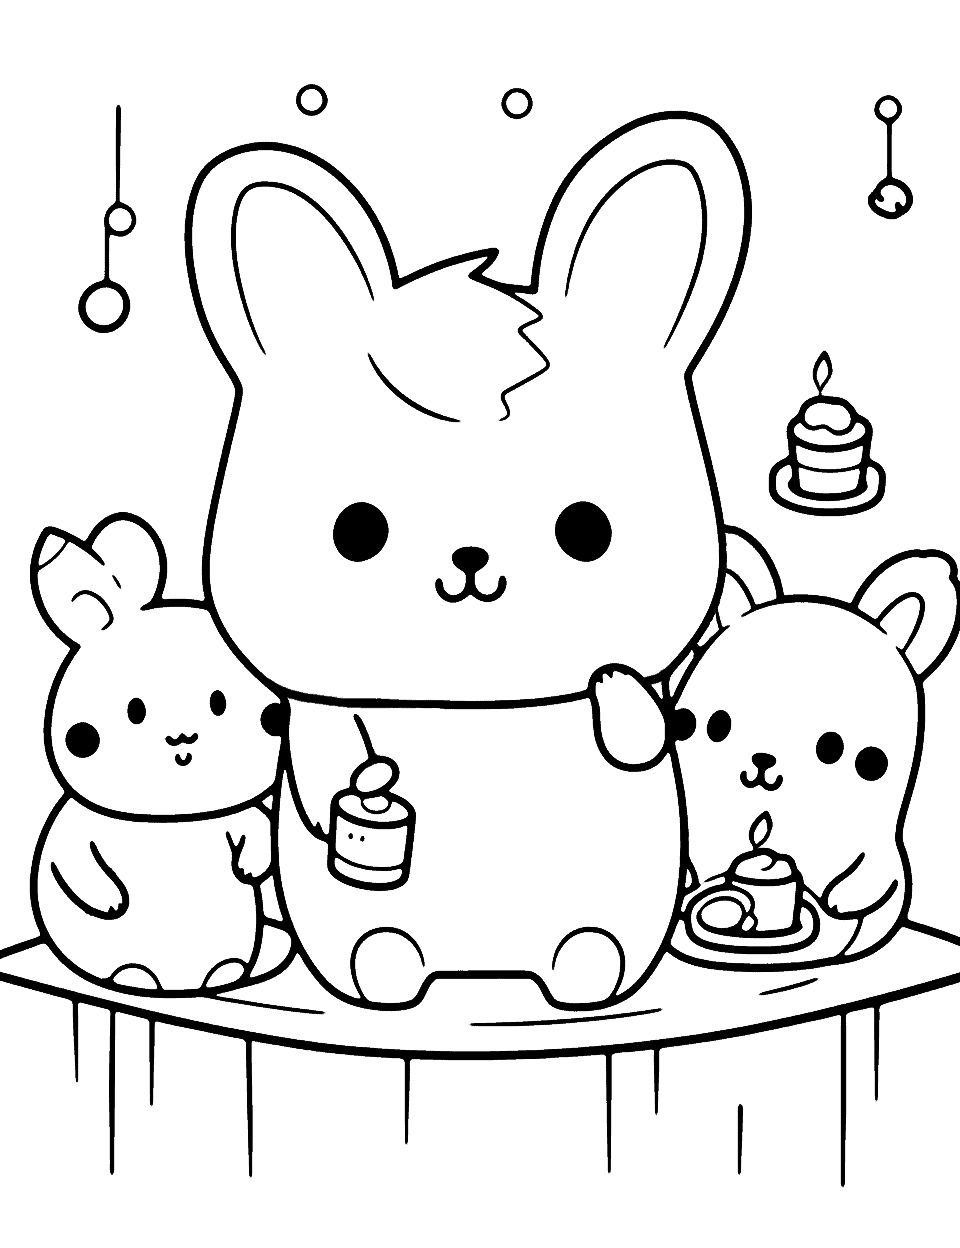 Easy-to-Color Animal Pajama Party Kawaii Coloring Page - A simple coloring page featuring several Kawaii animals having a fun pajama party.